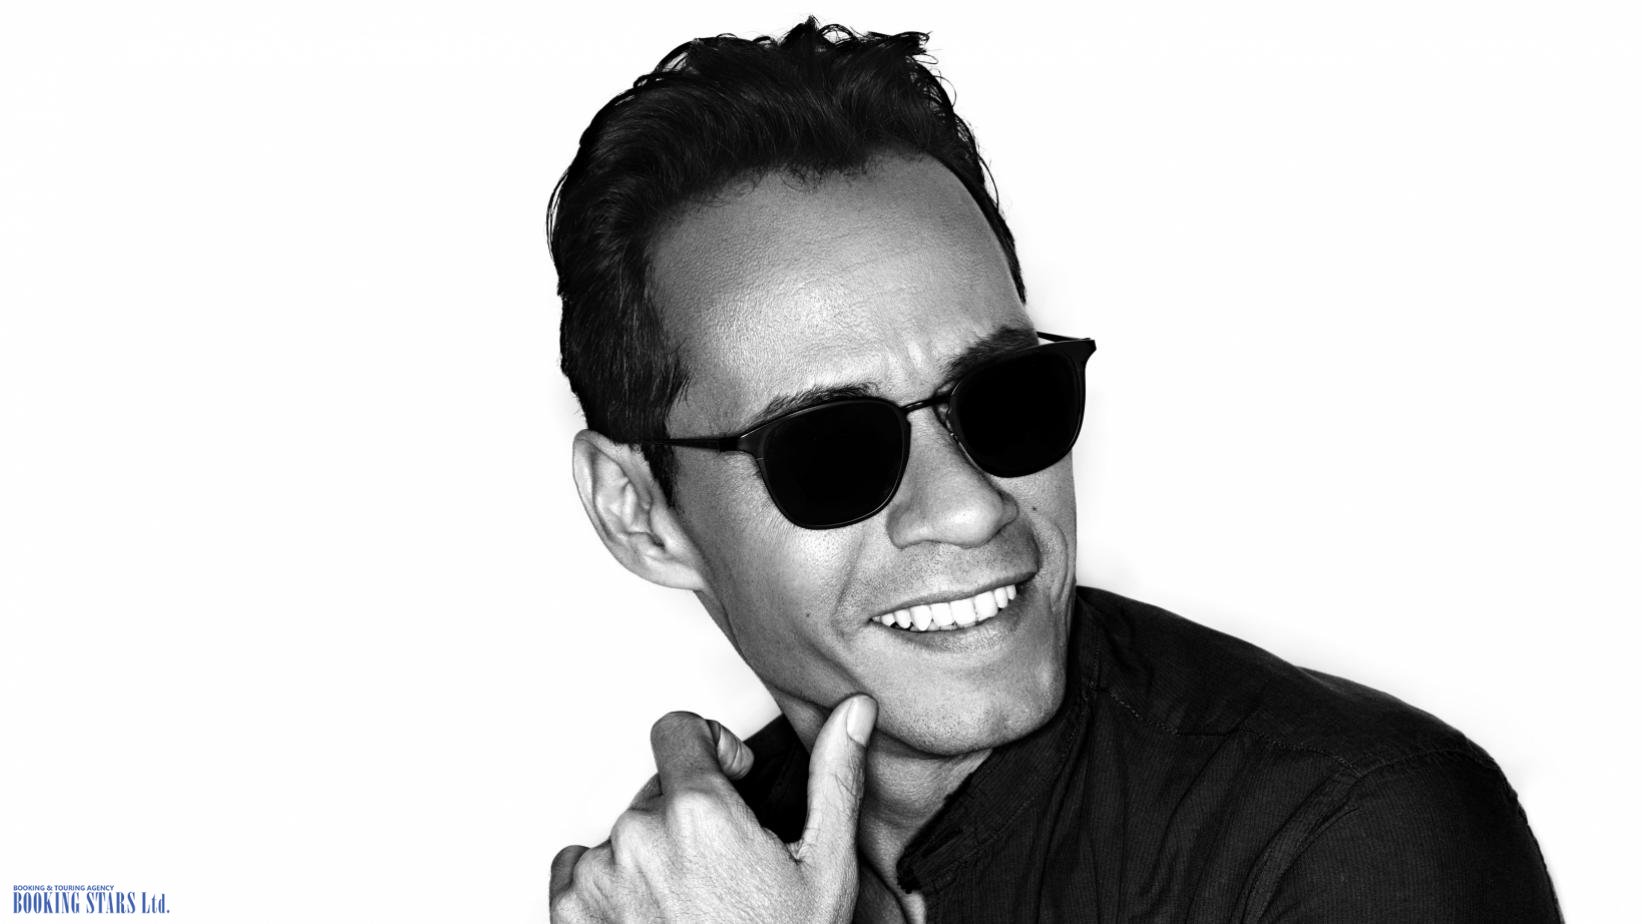 Booking Stars Ltd. Booking & Touring Agency. - Marc Anthony